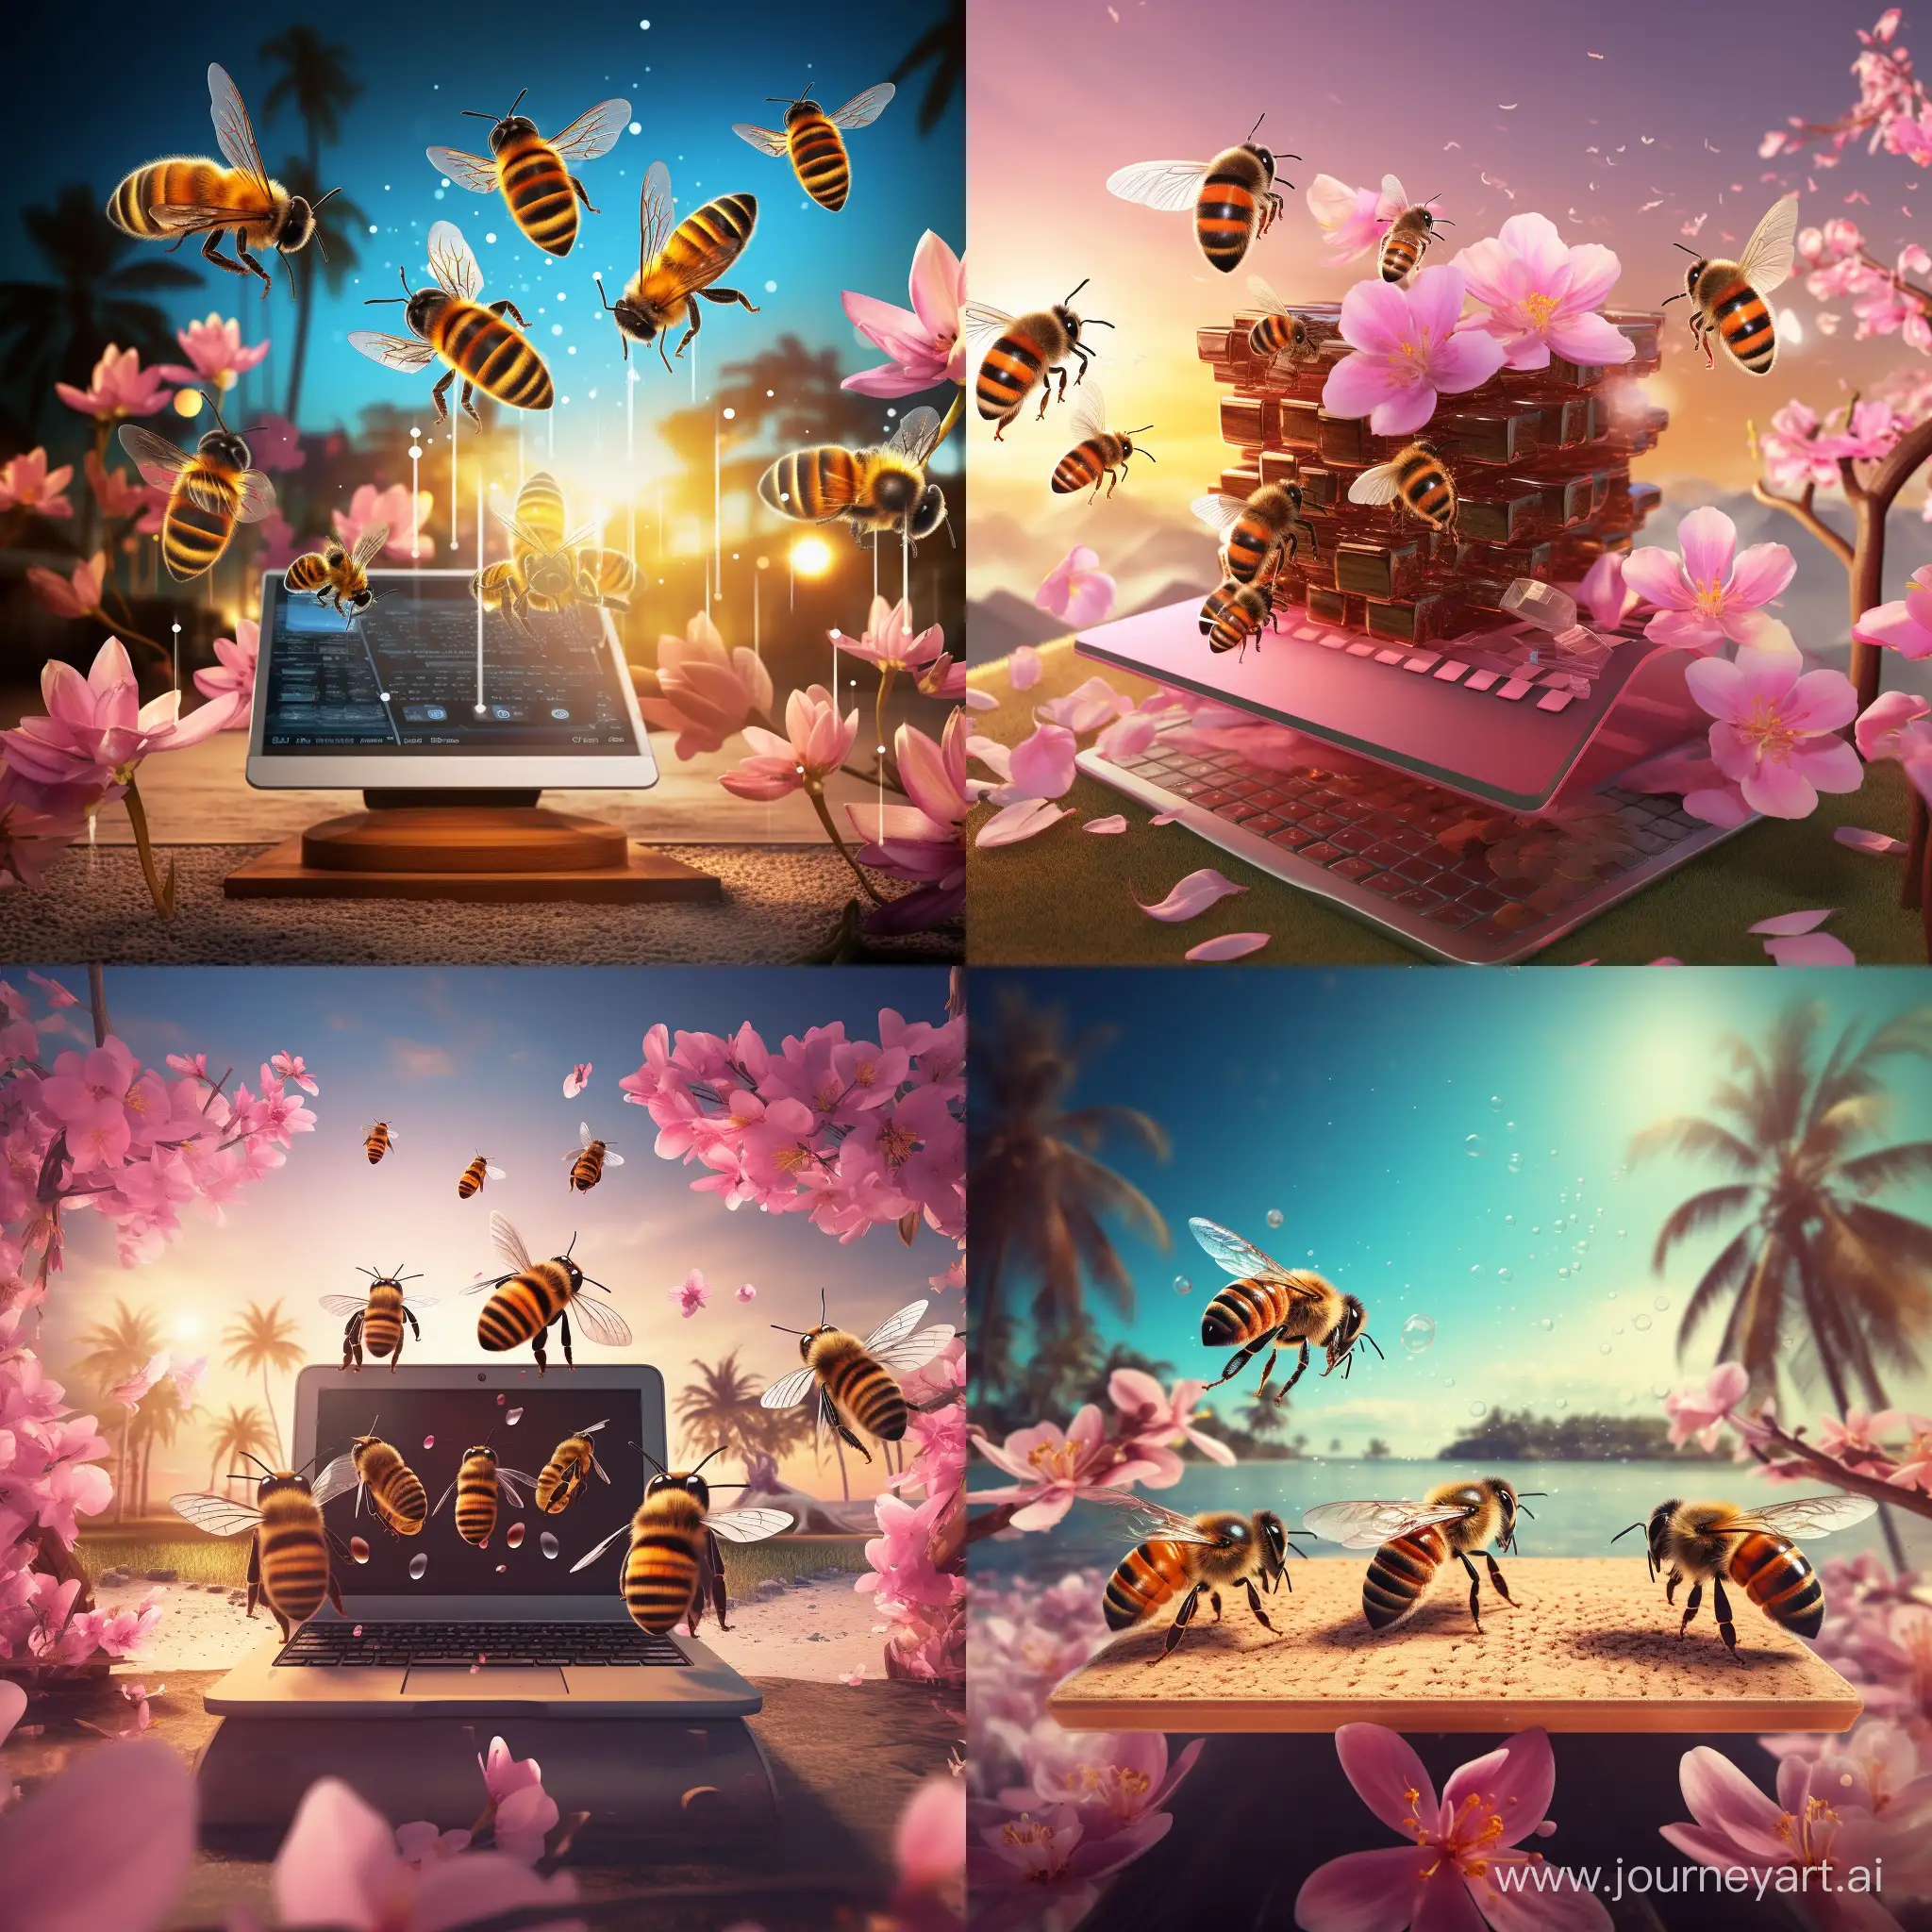 5 bees in 3d render with a bee hive cartoon being happy and designing web apps on laptops mid-air with an intuitive glow whilst having cherry blossoms and great palm trees around them
